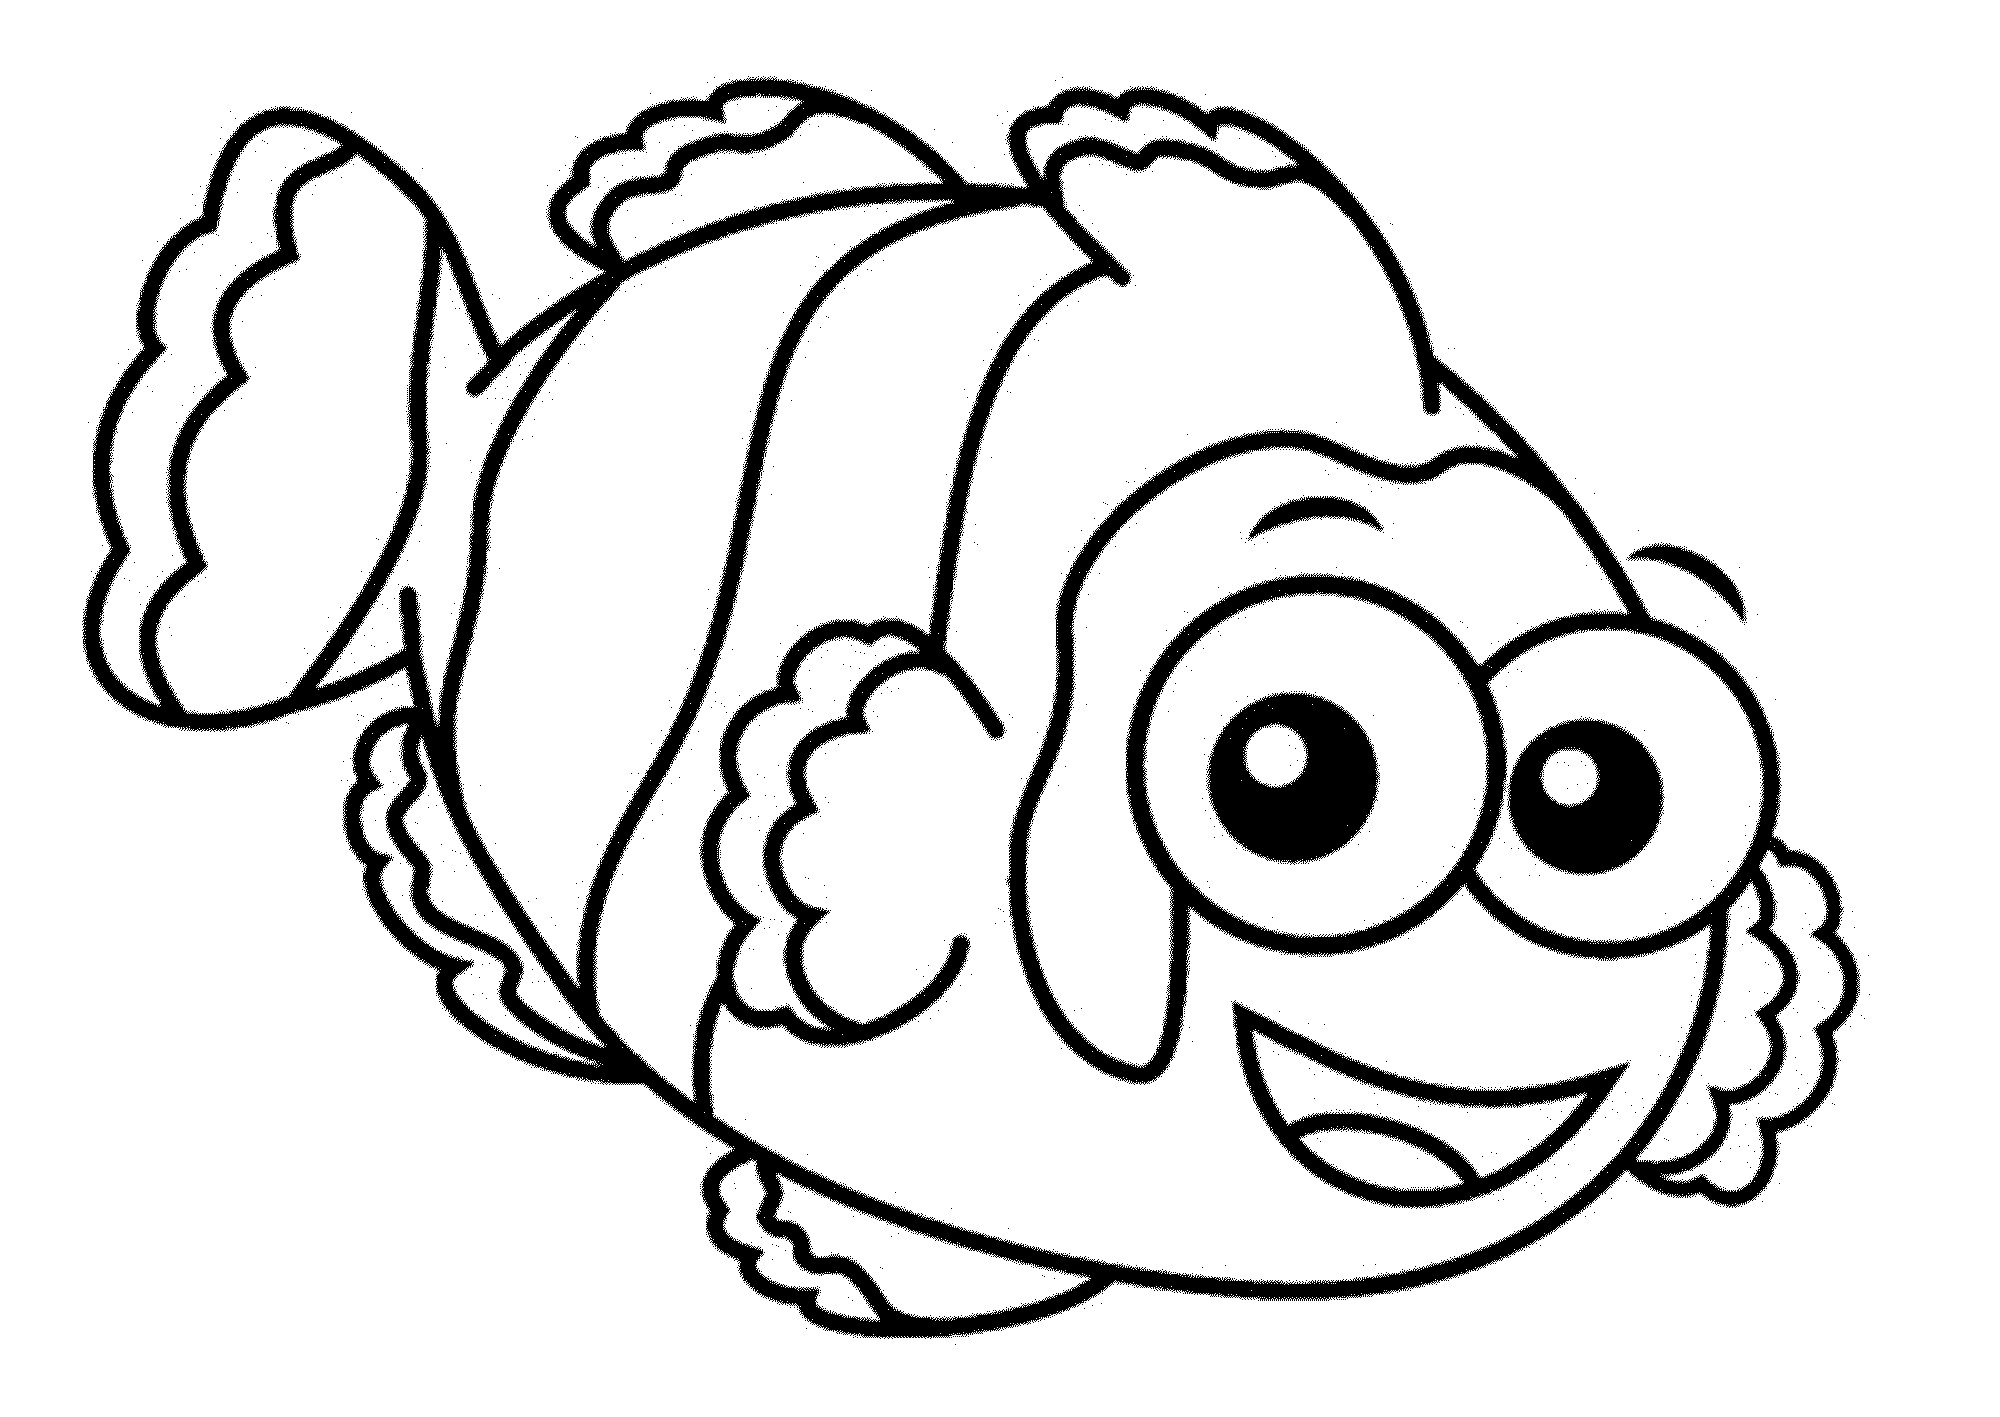 Coloring Pages Fish For Kids
 Print & Download Cute and Educative Fish Coloring Pages